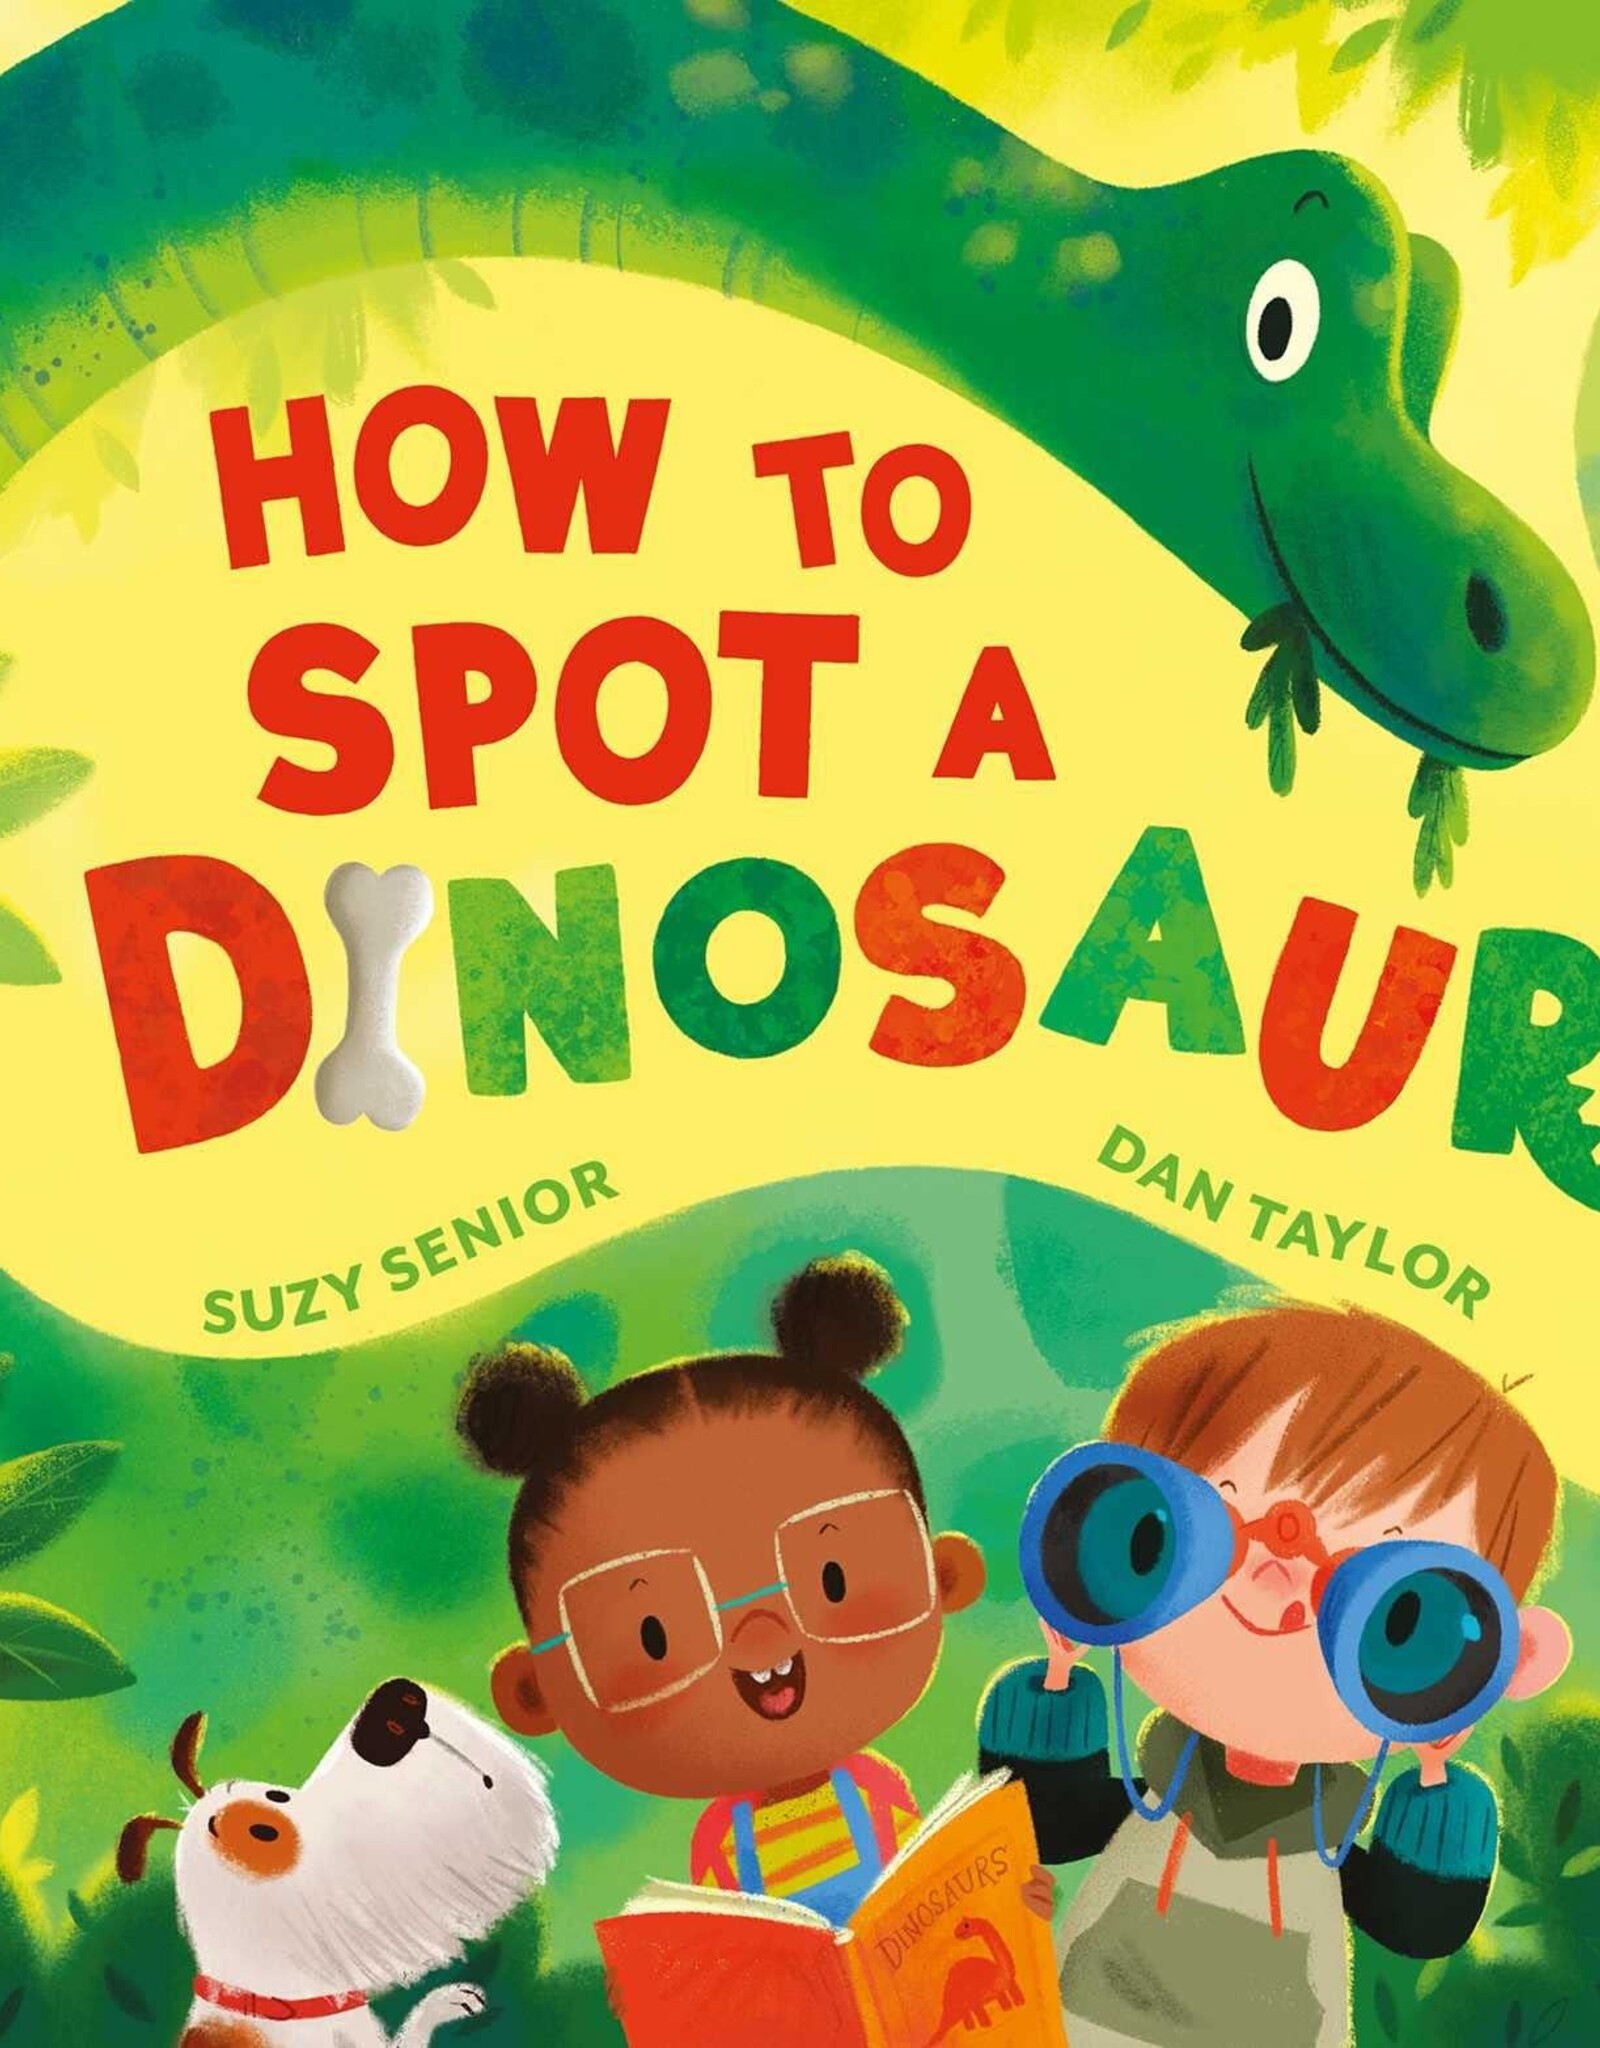 BOOK PUBLISHERS HOW TO SPOT A DINOSAUR